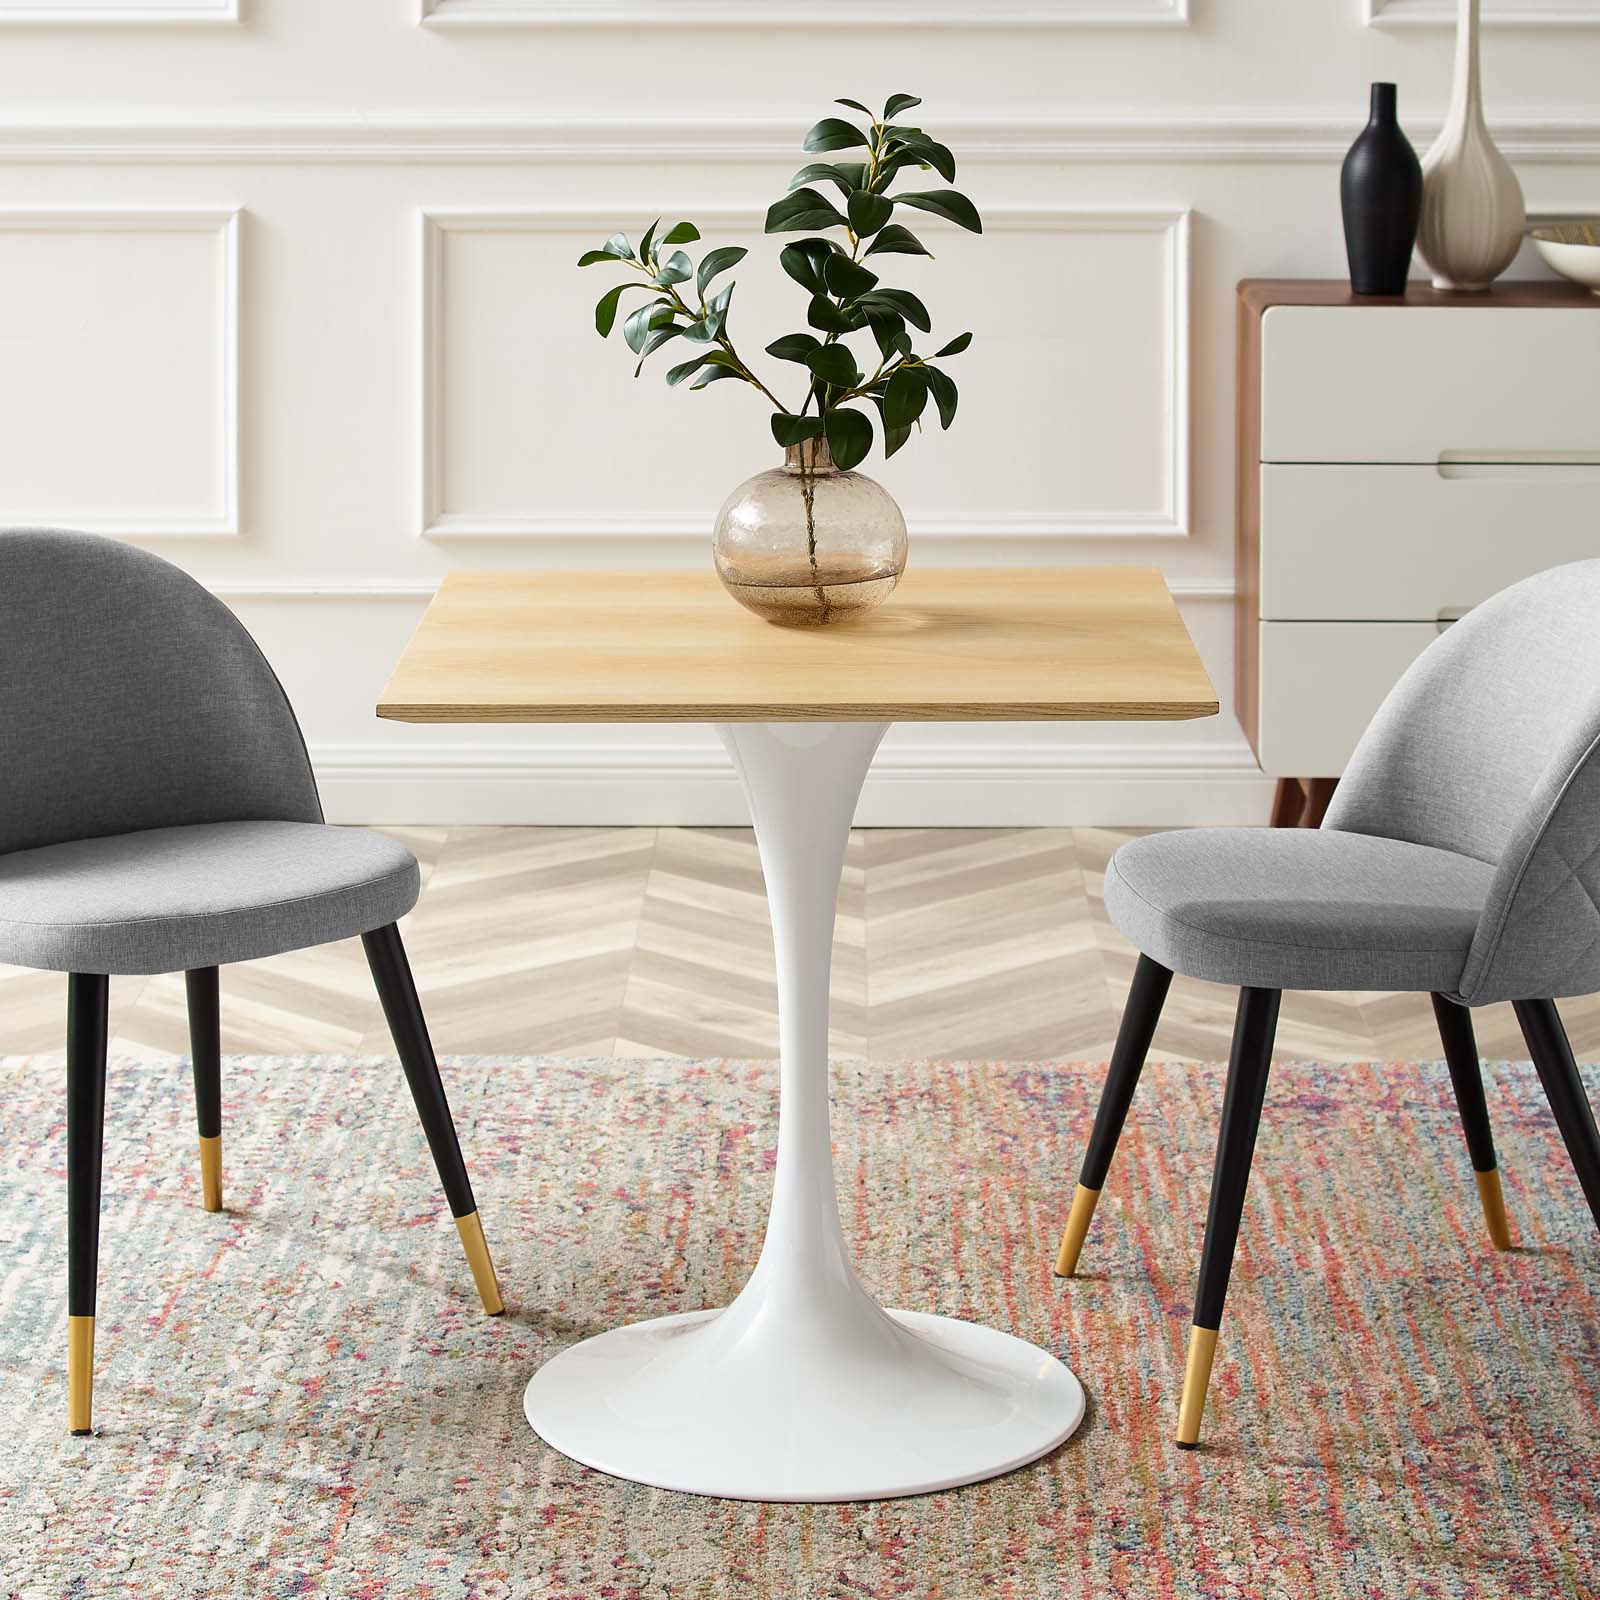 Lippa 28" Square Dining Table - East Shore Modern Home Furnishings